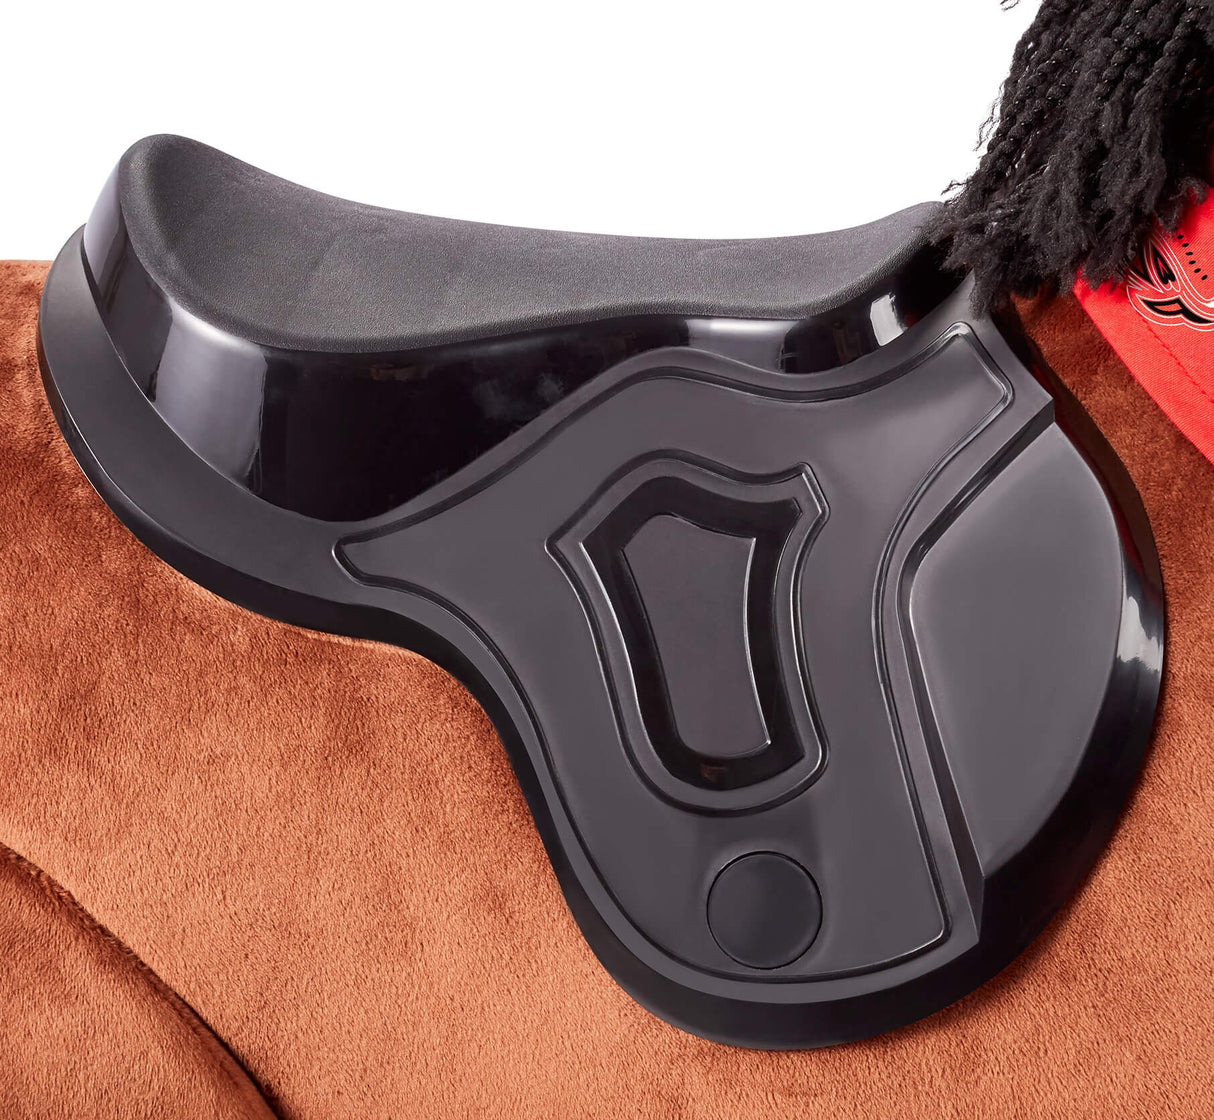 SADDLE TO KEEP YOU IN PLACE WHILE RIDING